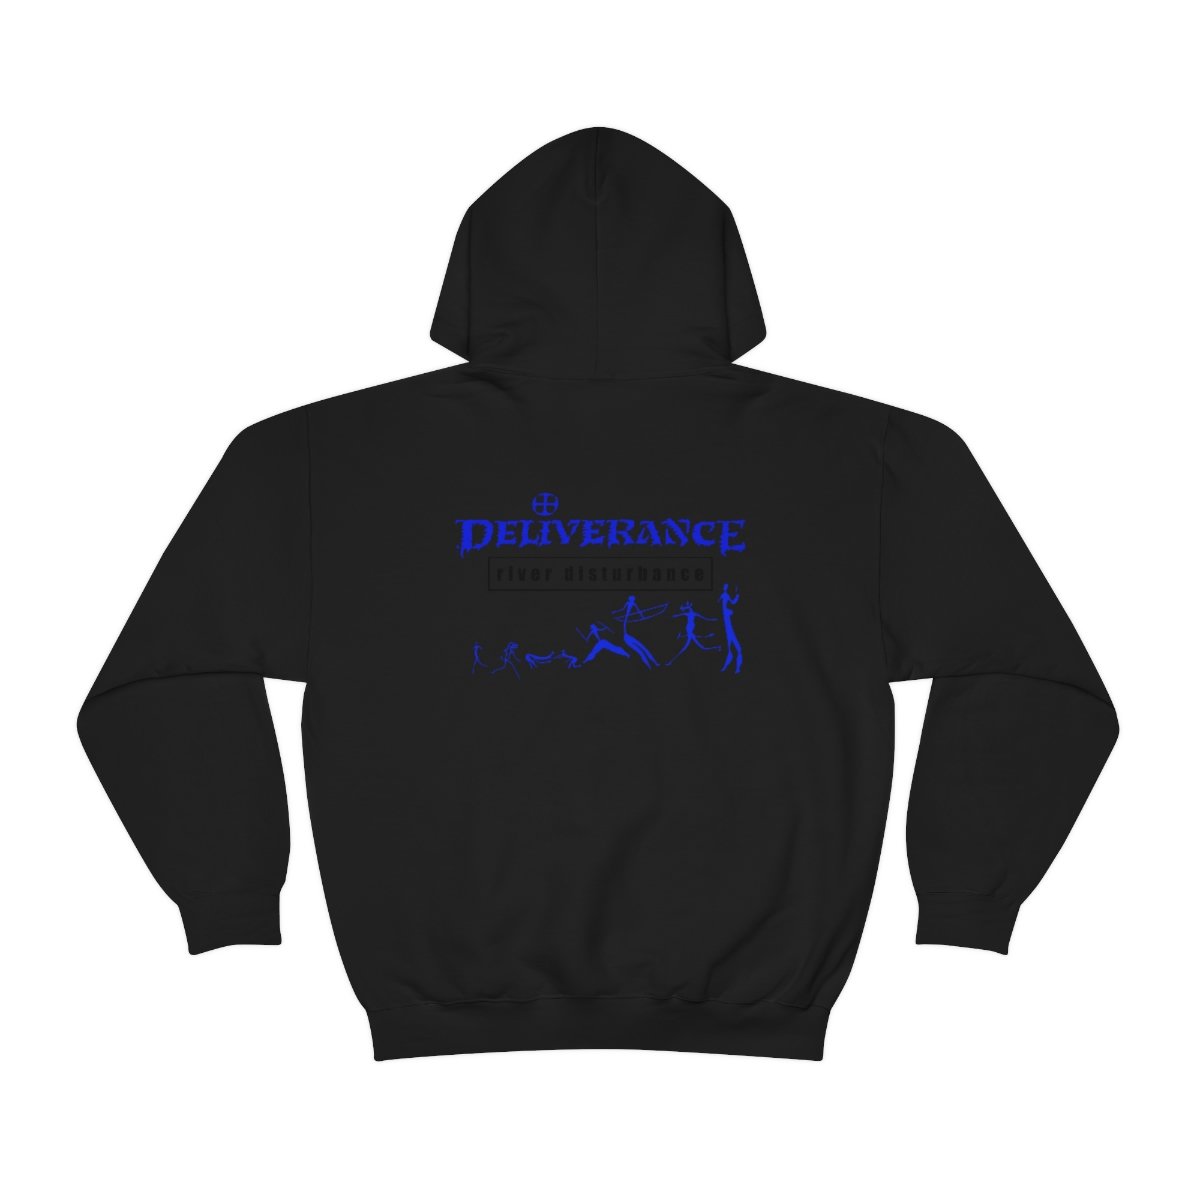 Deliverance – River Disturbance Pullover Hooded Sweatshirt 2 sided